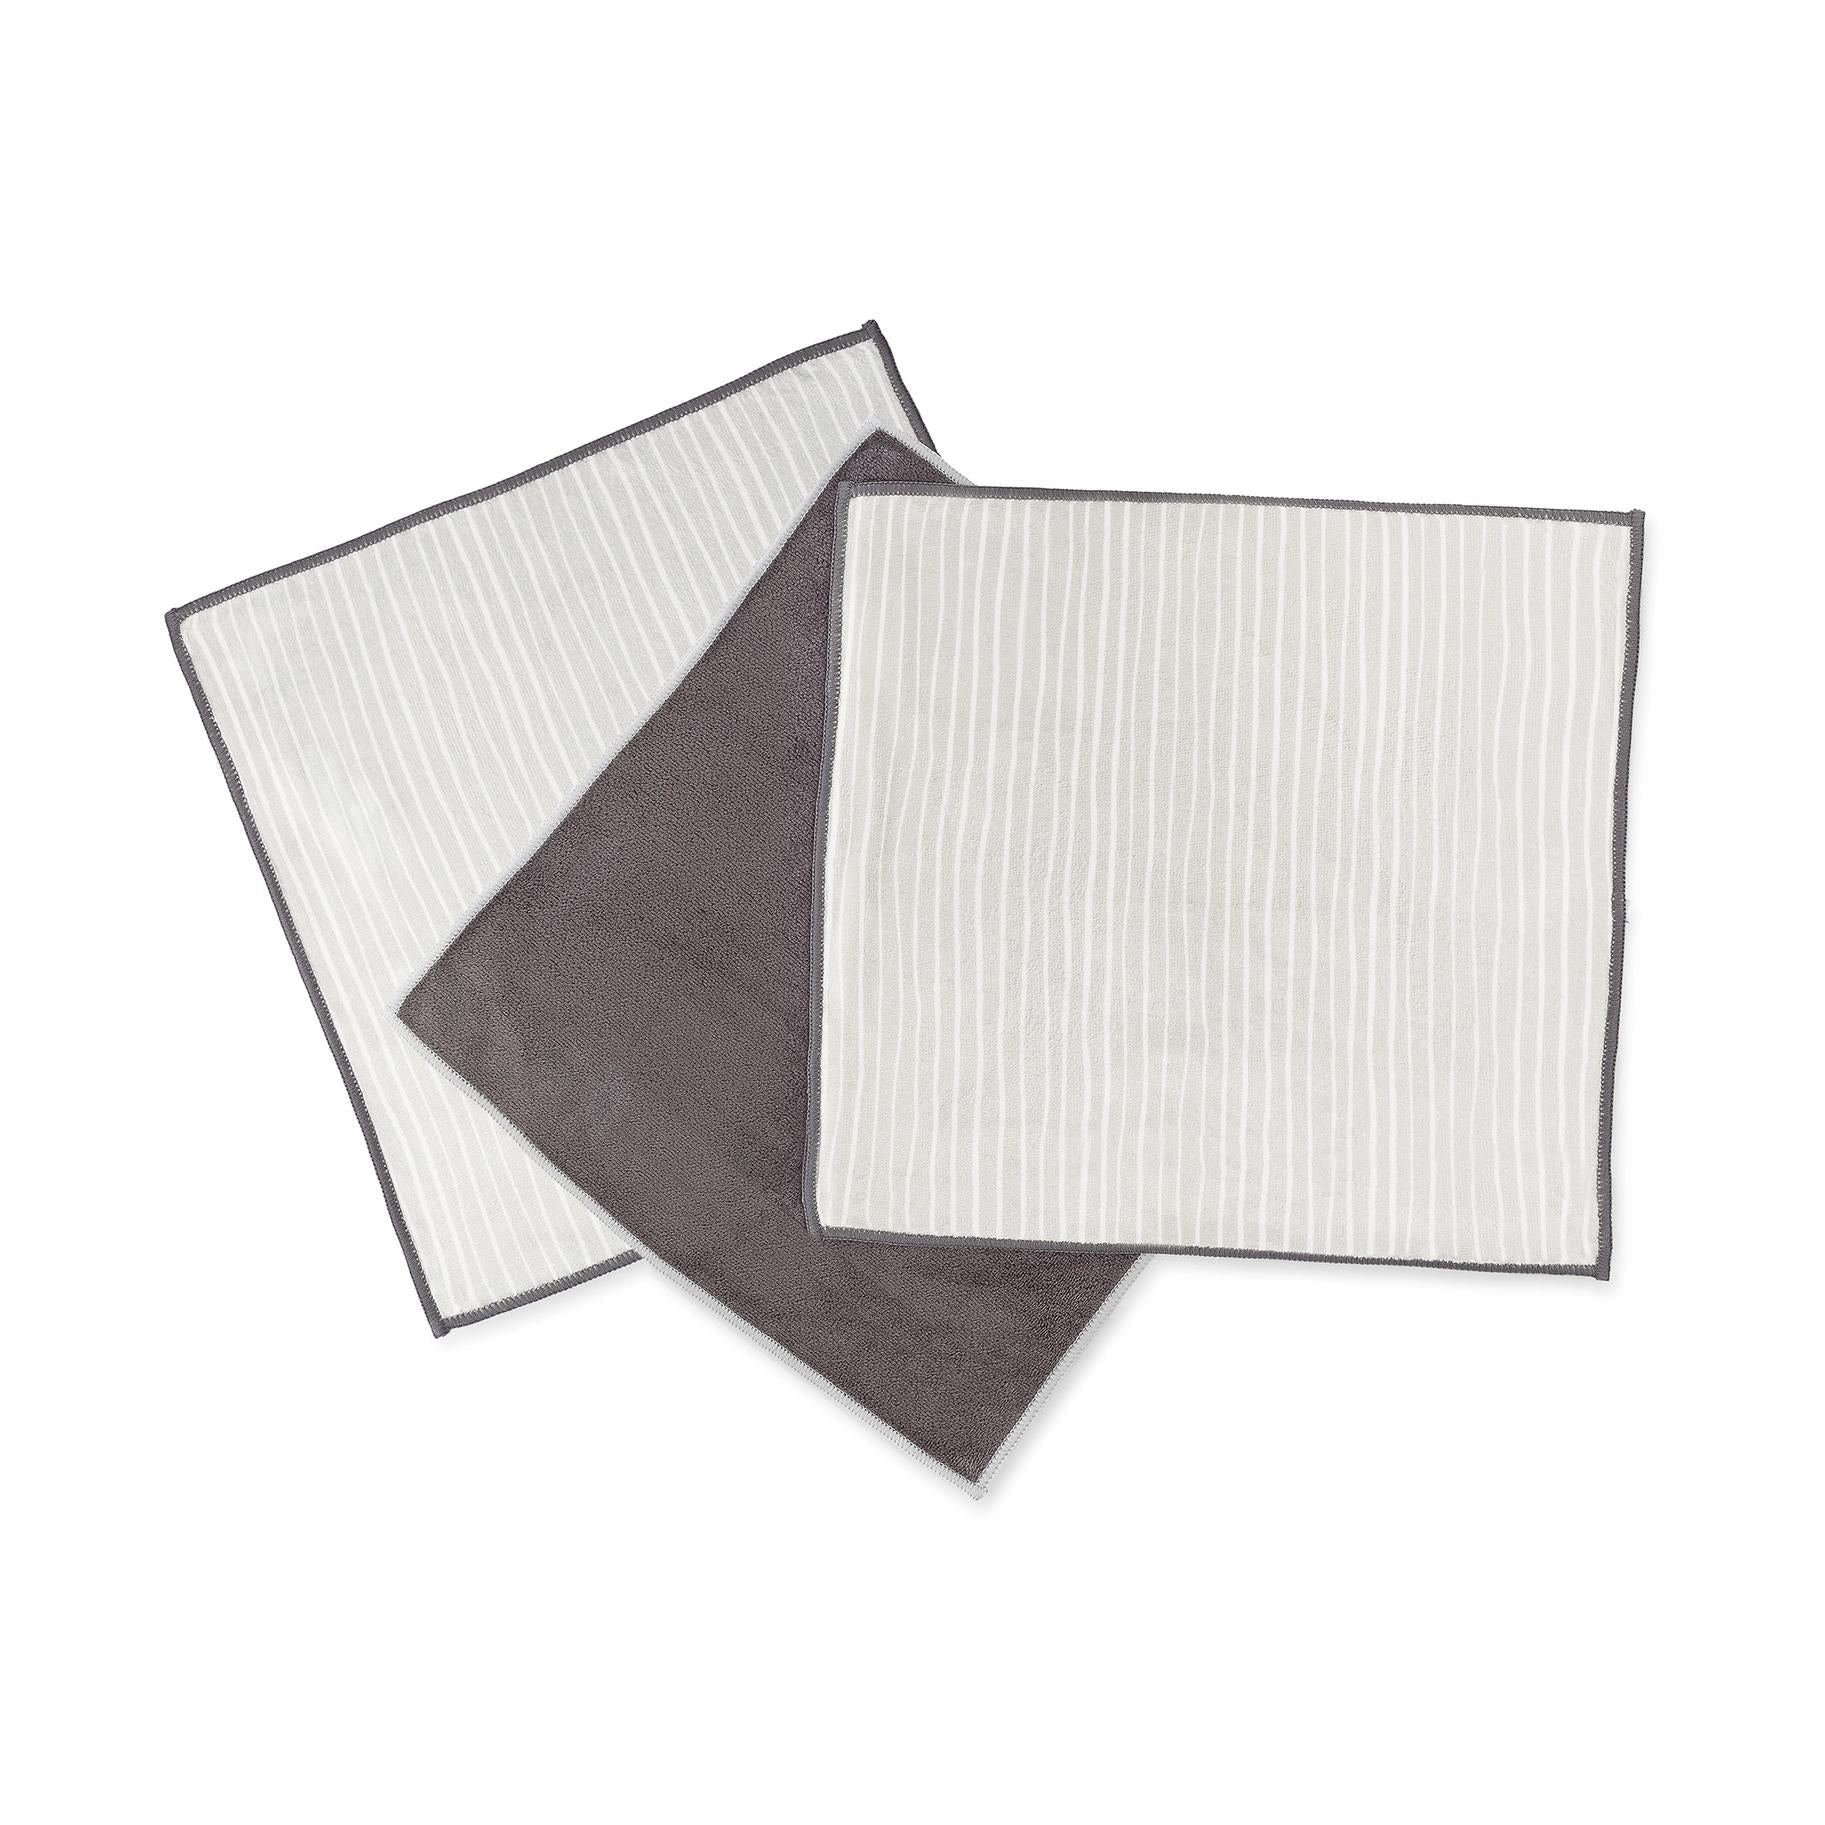 Renew Recycled All-Purpose Microfiber Cloths (set of 3)